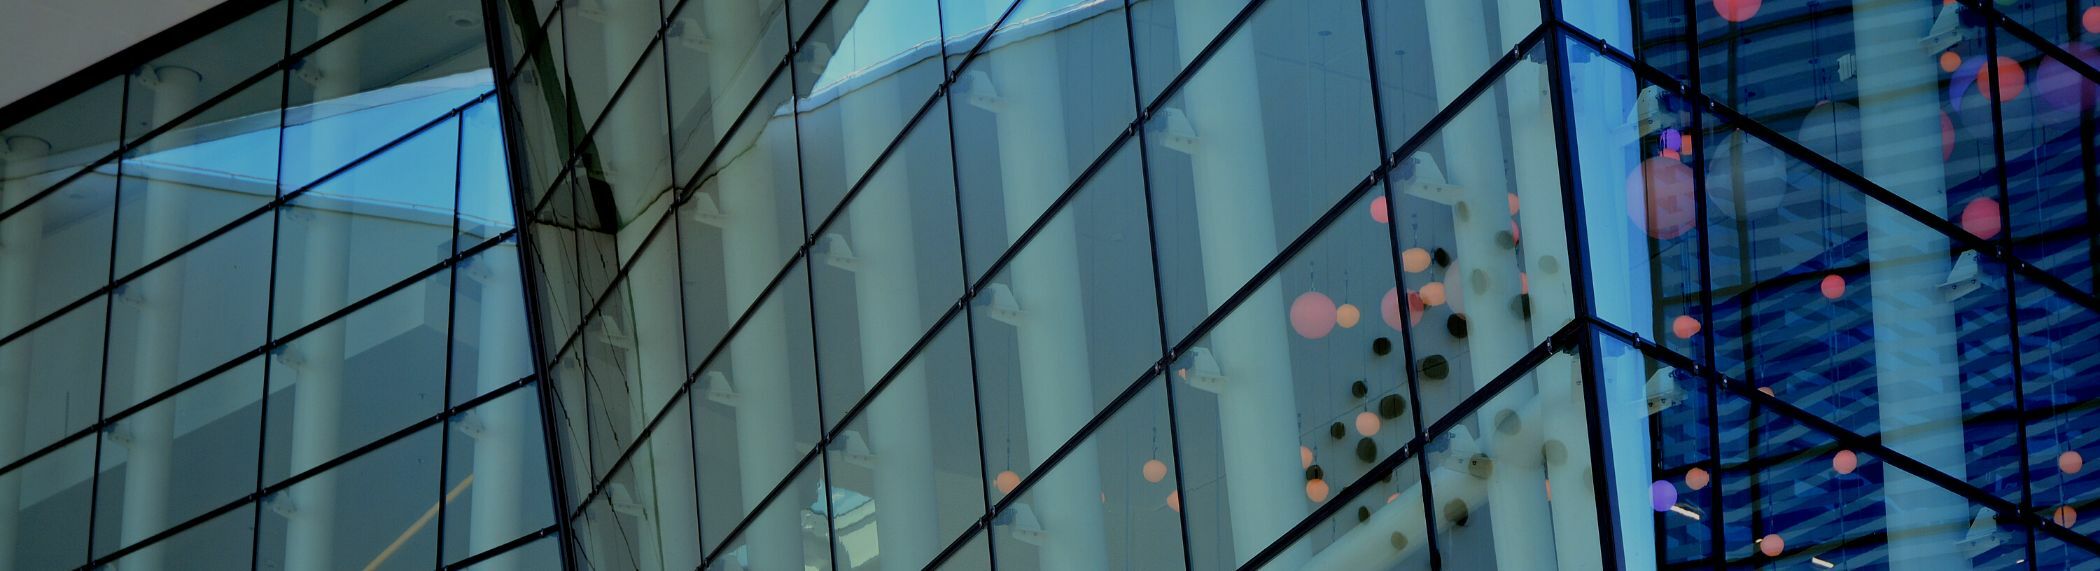 Close up of windows on a modern building with office buildings in the background